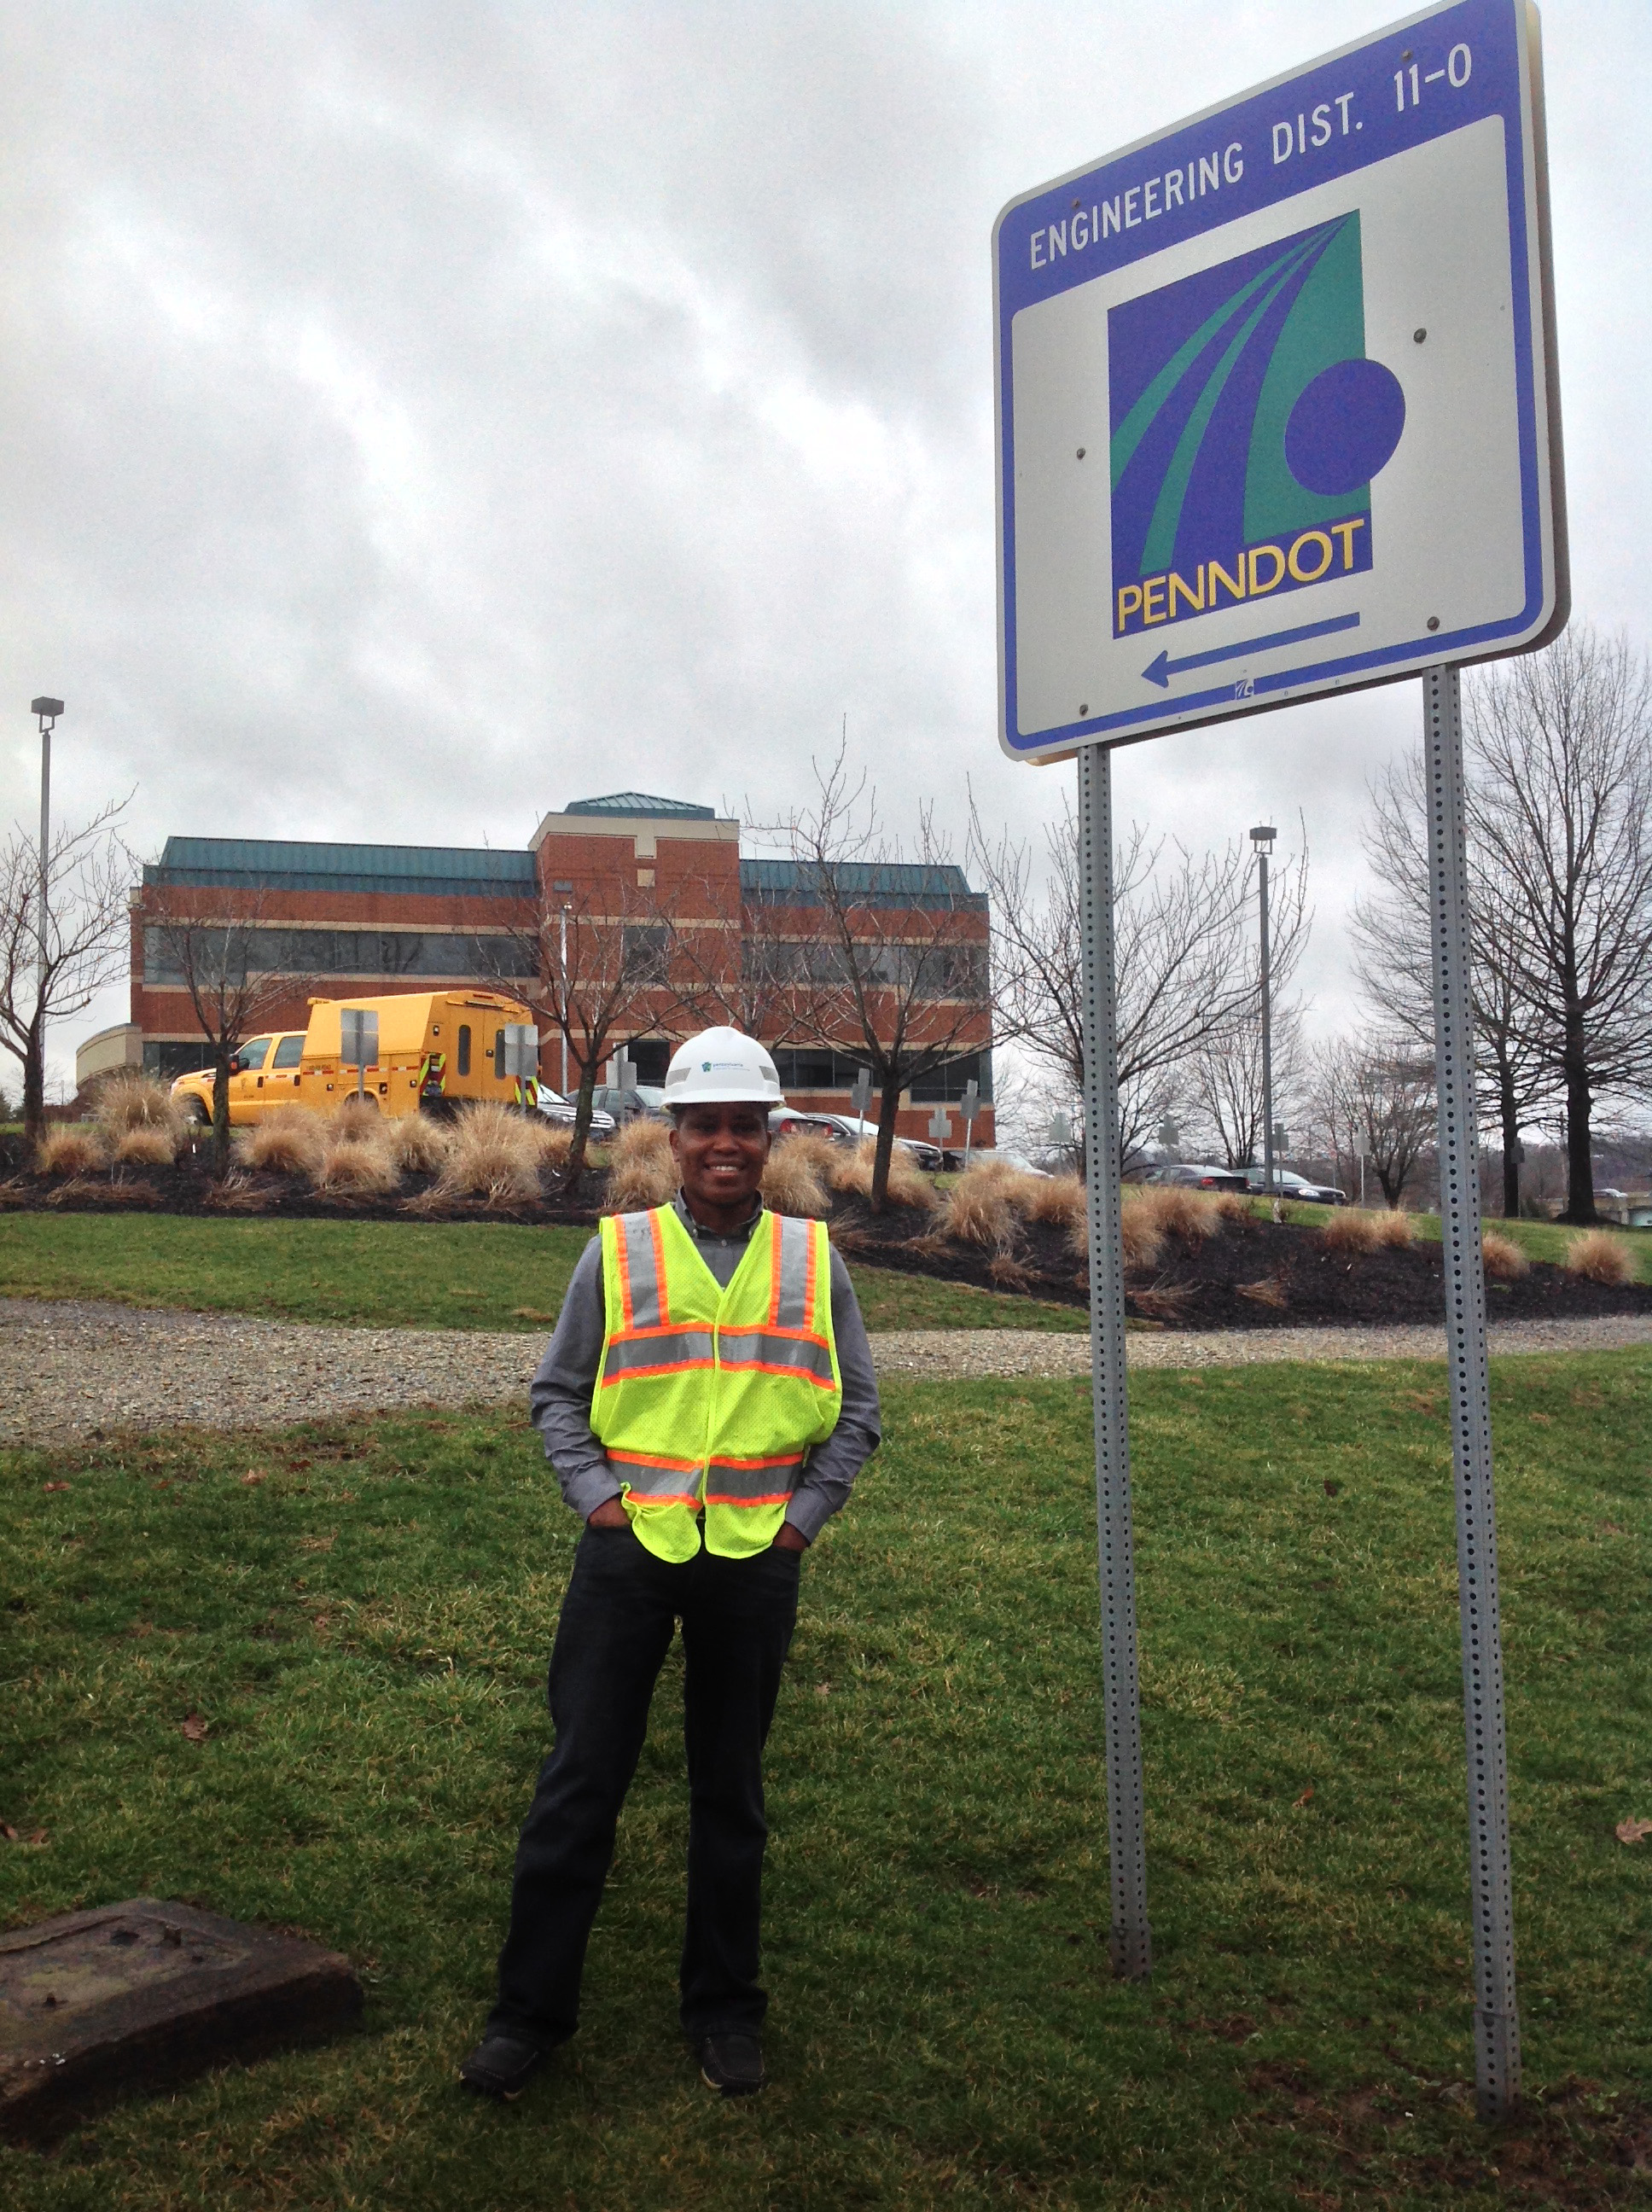 philip mutunga in construction safety gear with penndot building and sign in the background